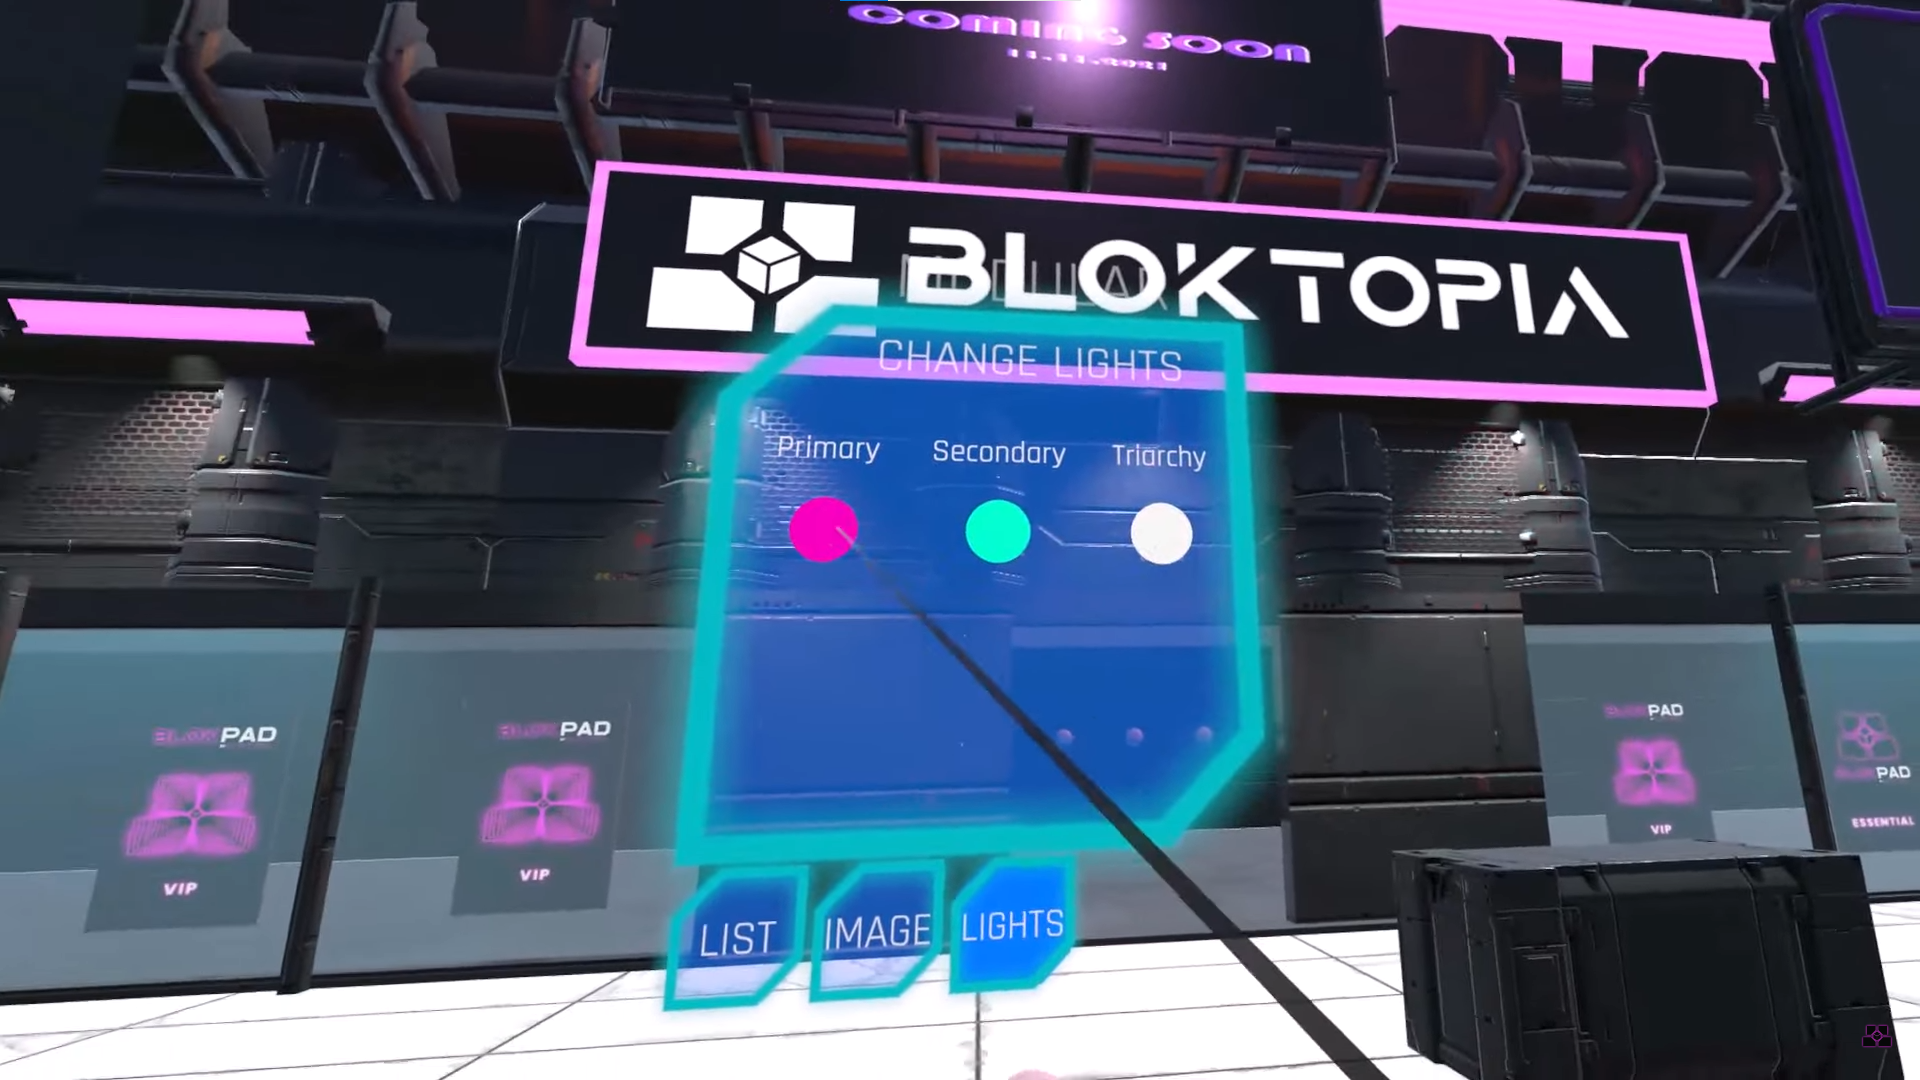 game image from Bloktopia